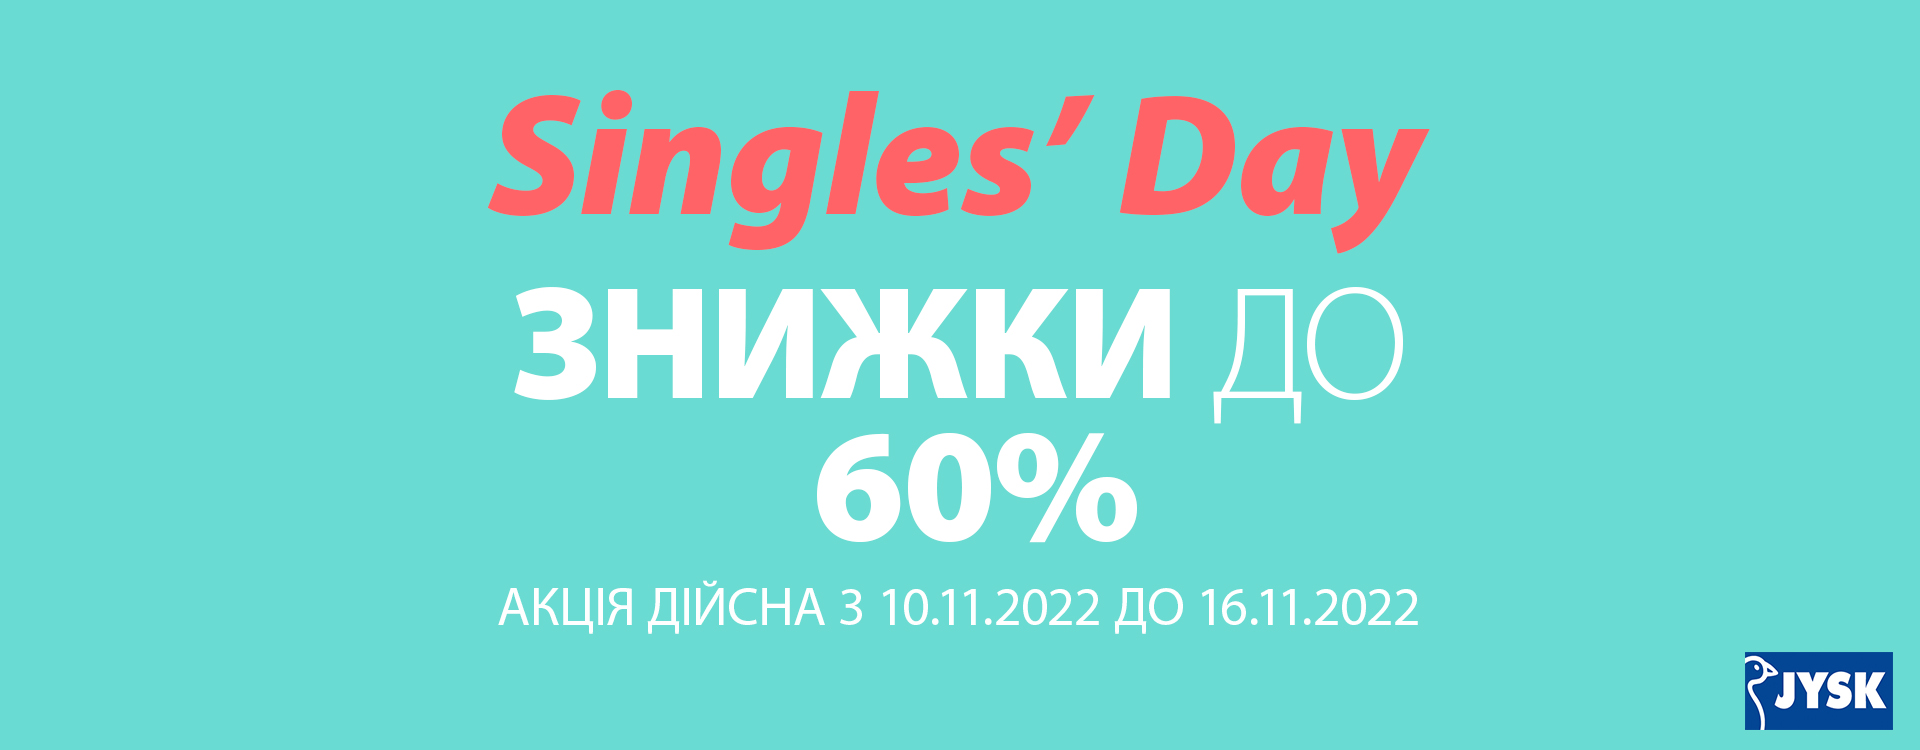 World shopping day at JYSK discounts up to 60%